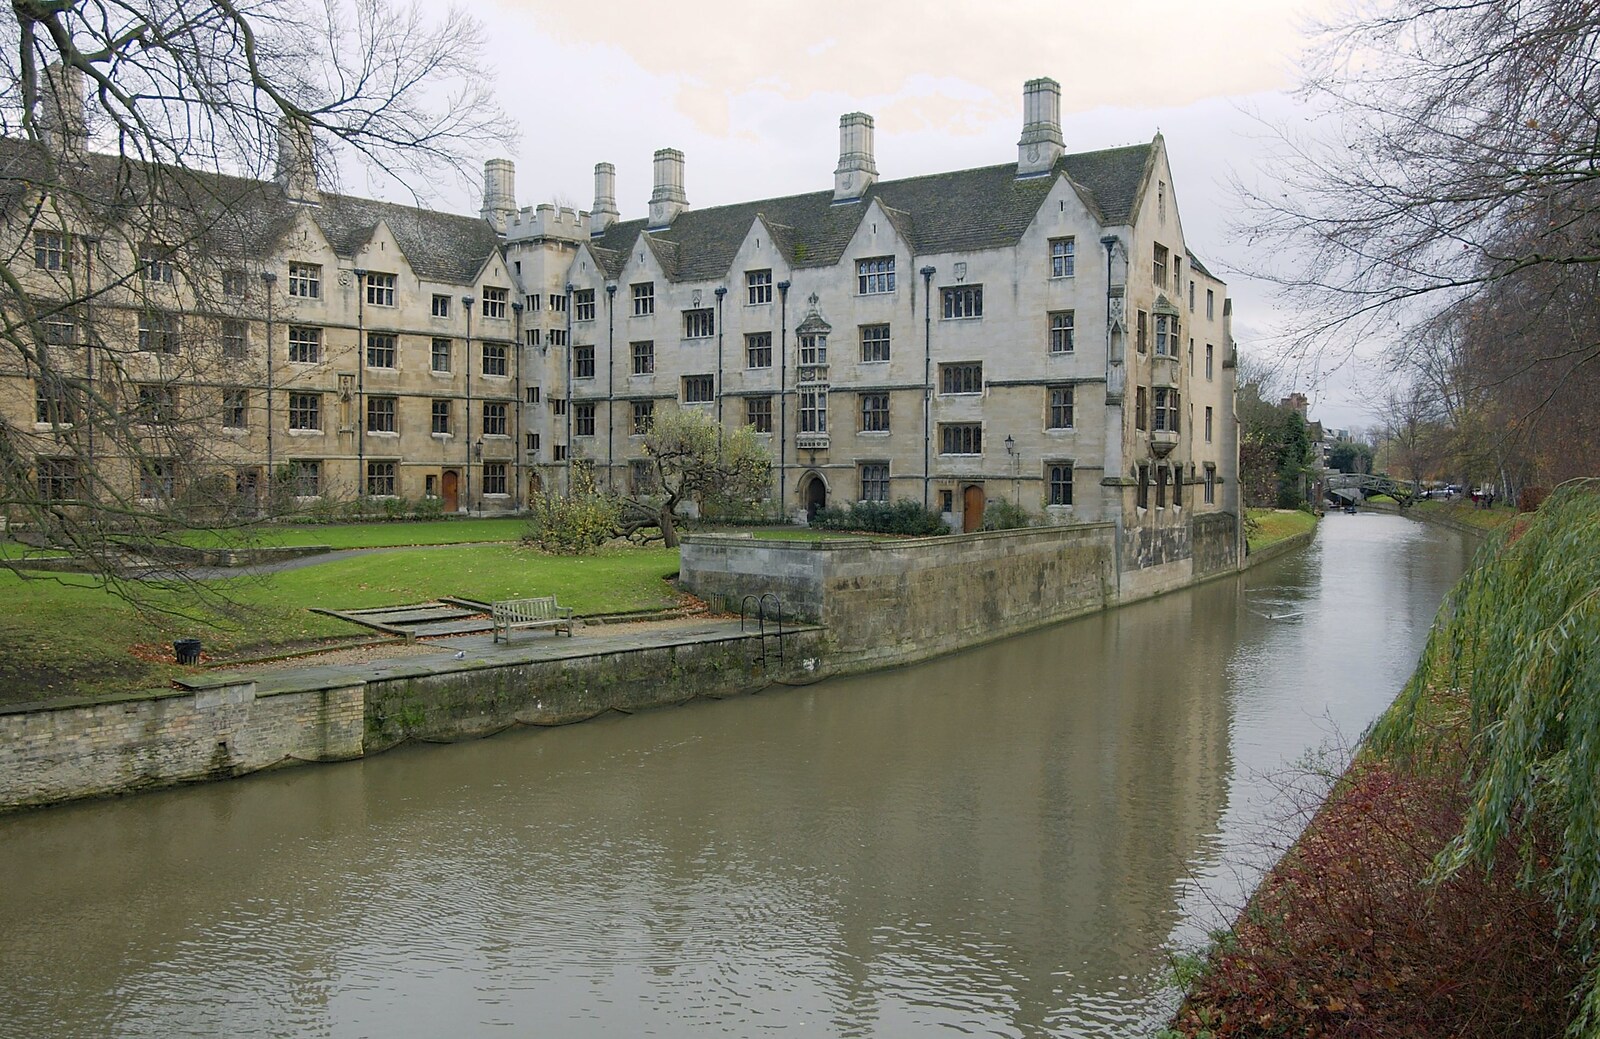 On the Cam from Autumn Colleges: a Wander around The Backs, Cambridge - 26th November